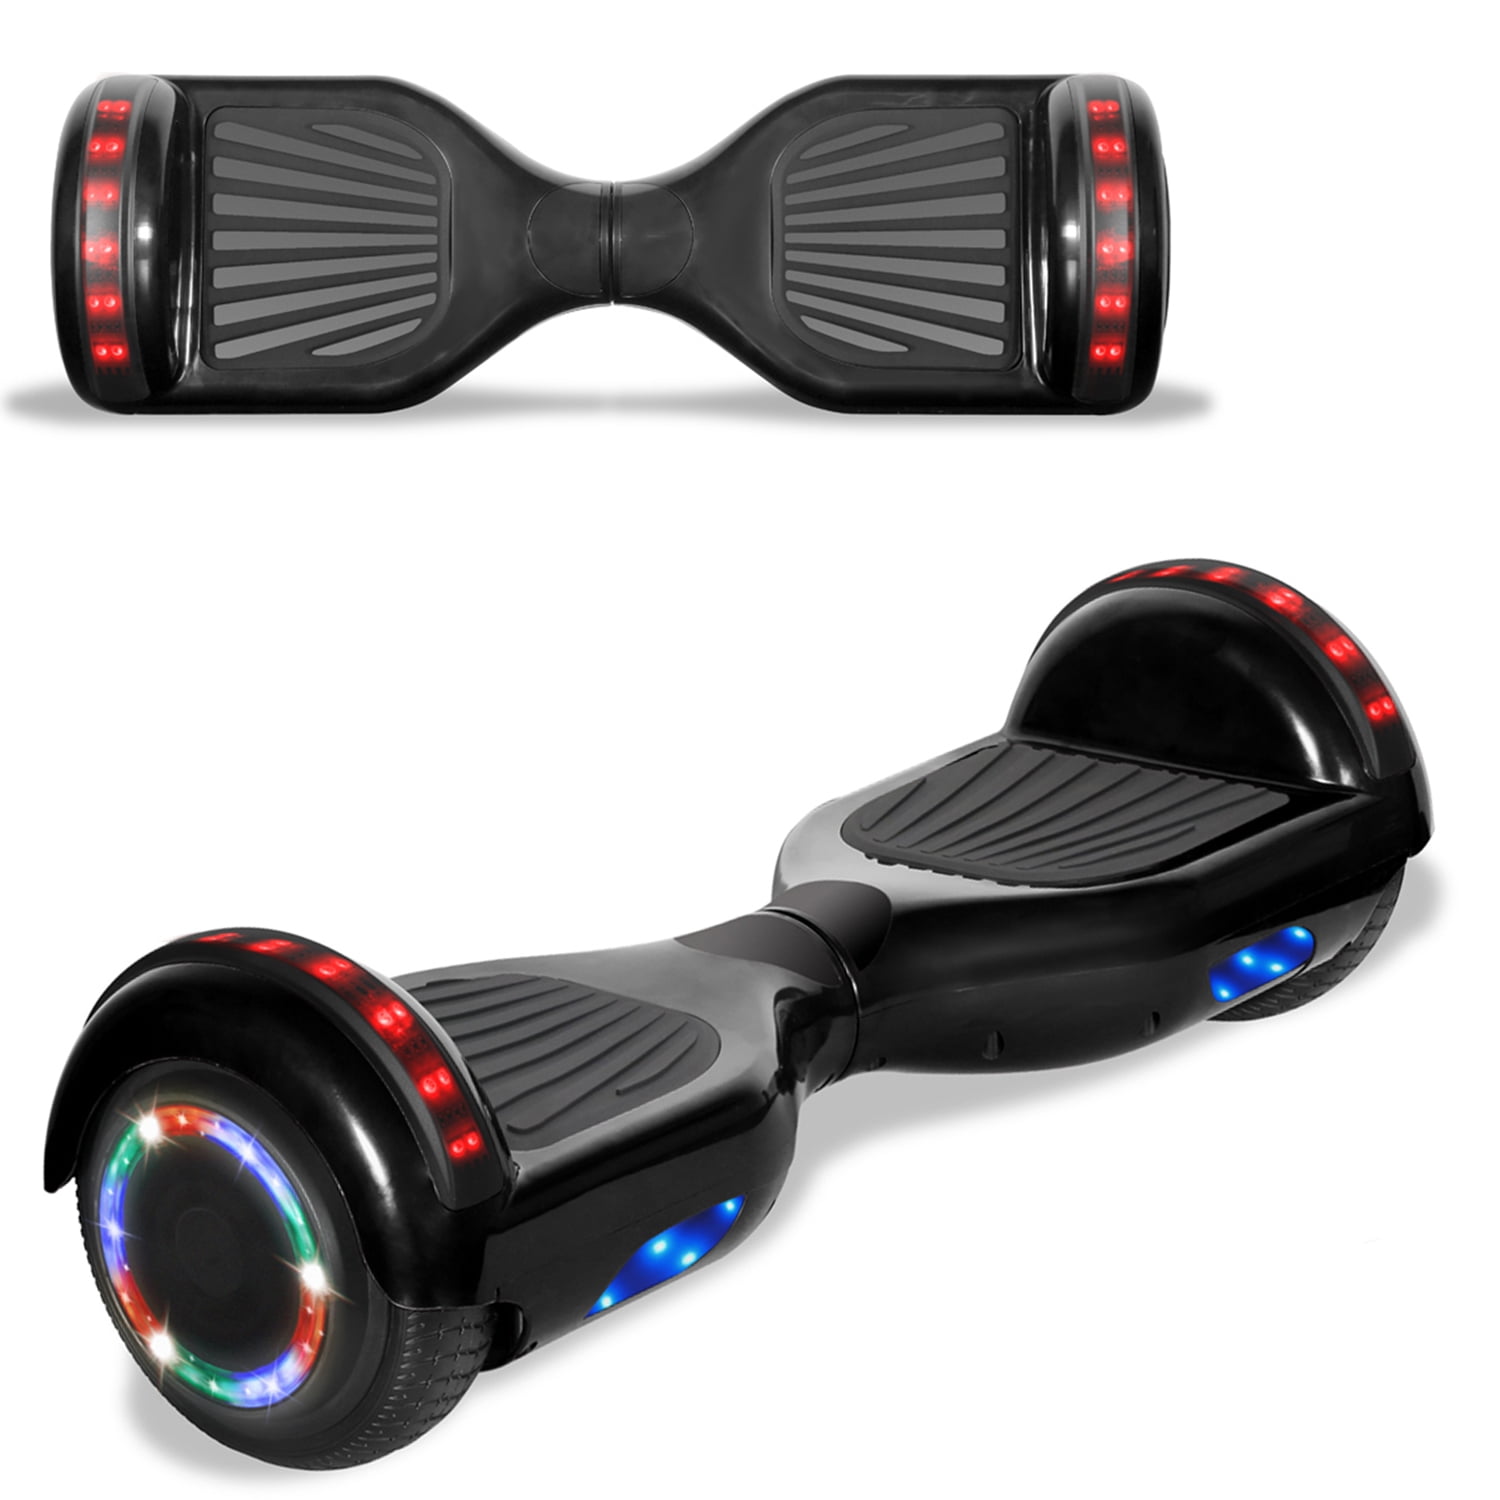 Wheels LED Lights and Portable Carrying Bag Sea Eagle Hoverboard Self Balancing Scooter Hover Board for Kids Adults with UL2272 Certified 